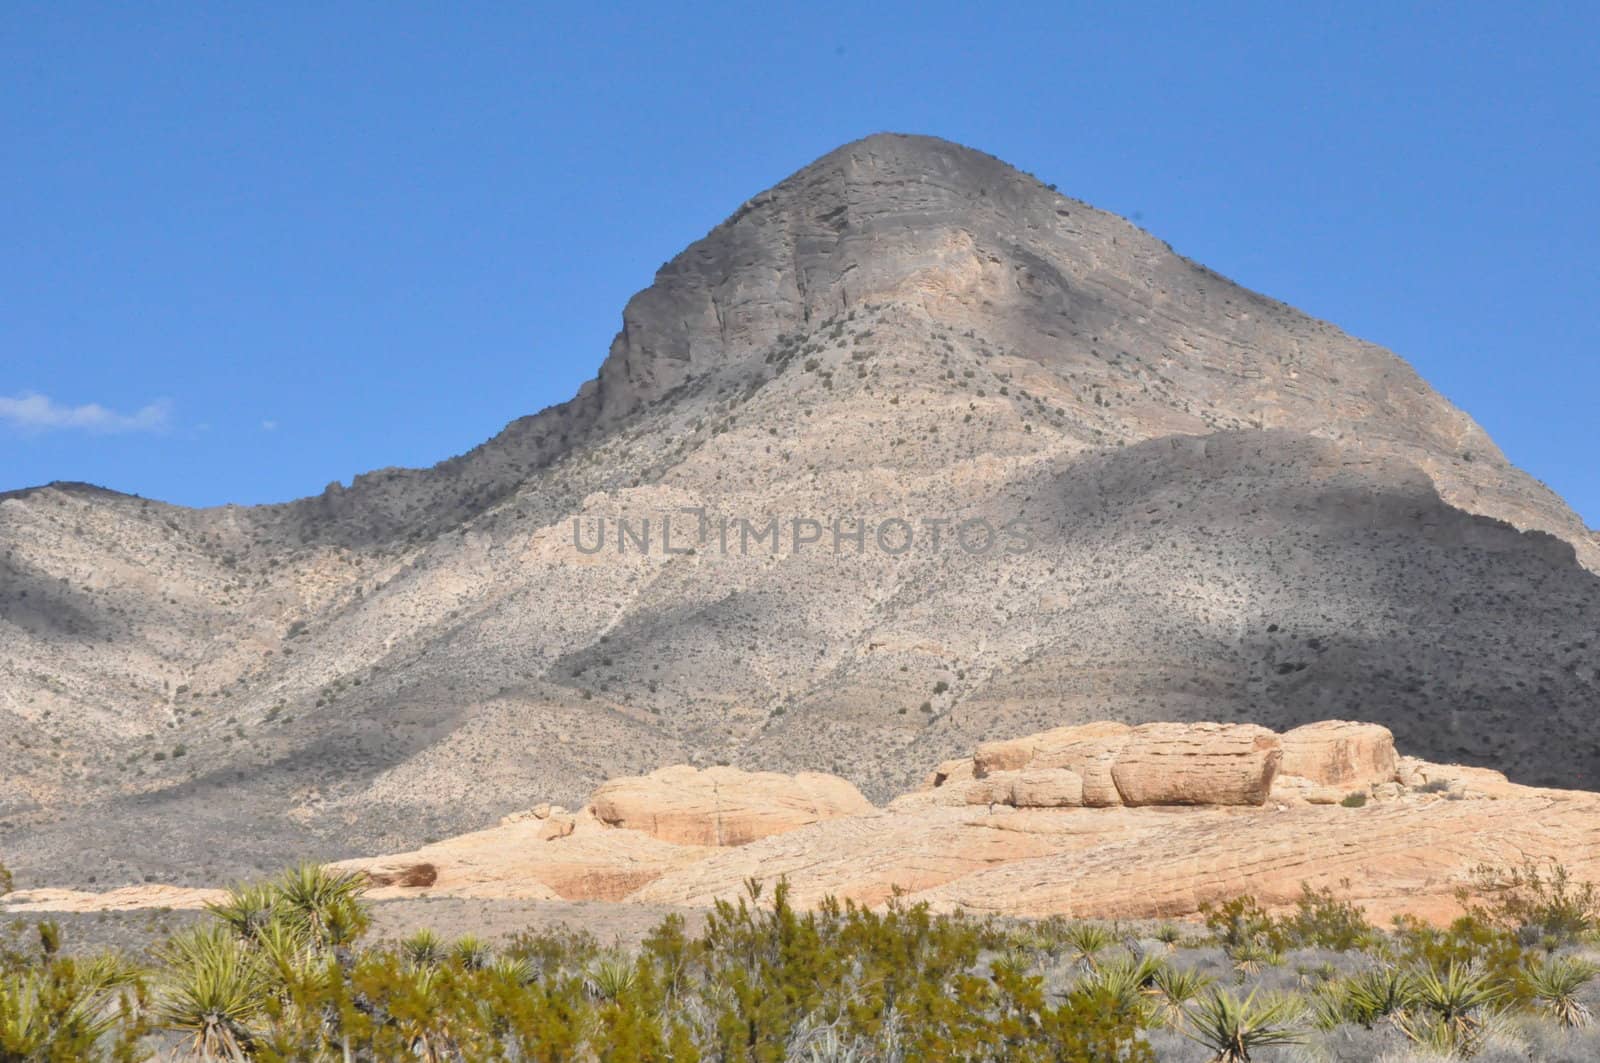 Red Rock Canyon in Las Vegas, Nevada